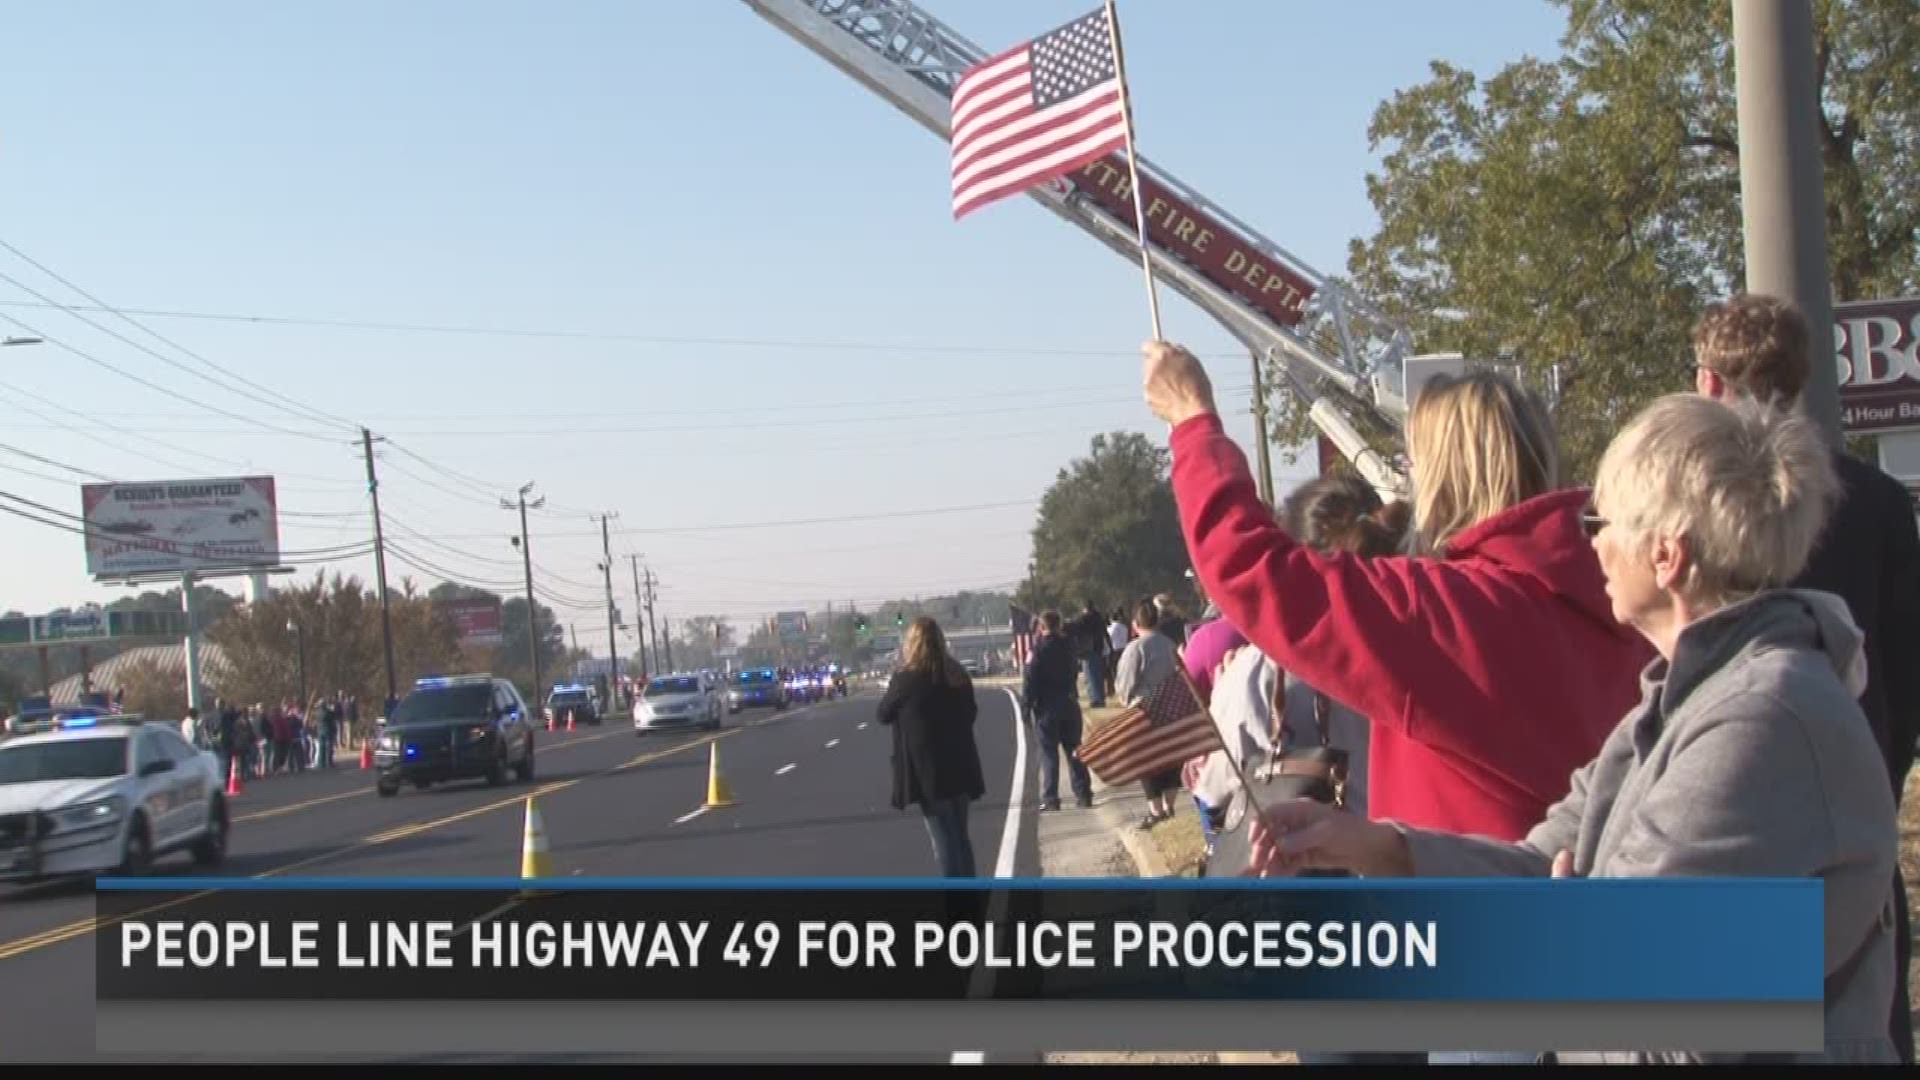 People line Highway 49 for Sondron procession